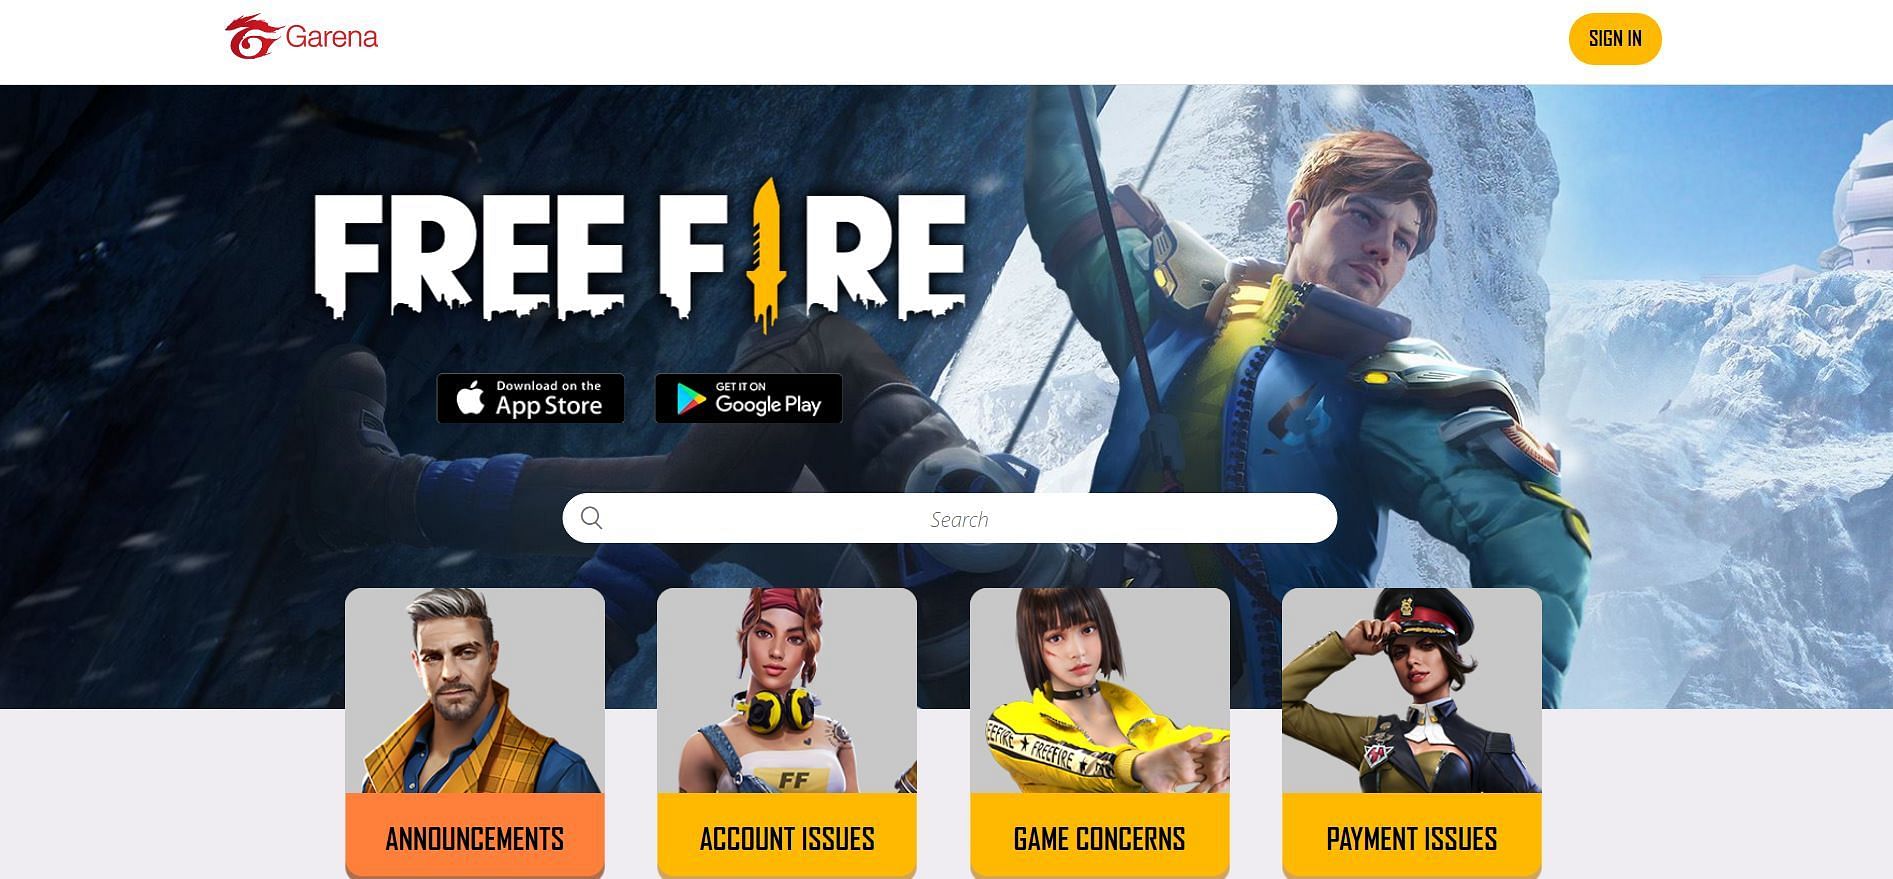 Free Fire Hacks: How to report hackers, cheats and more